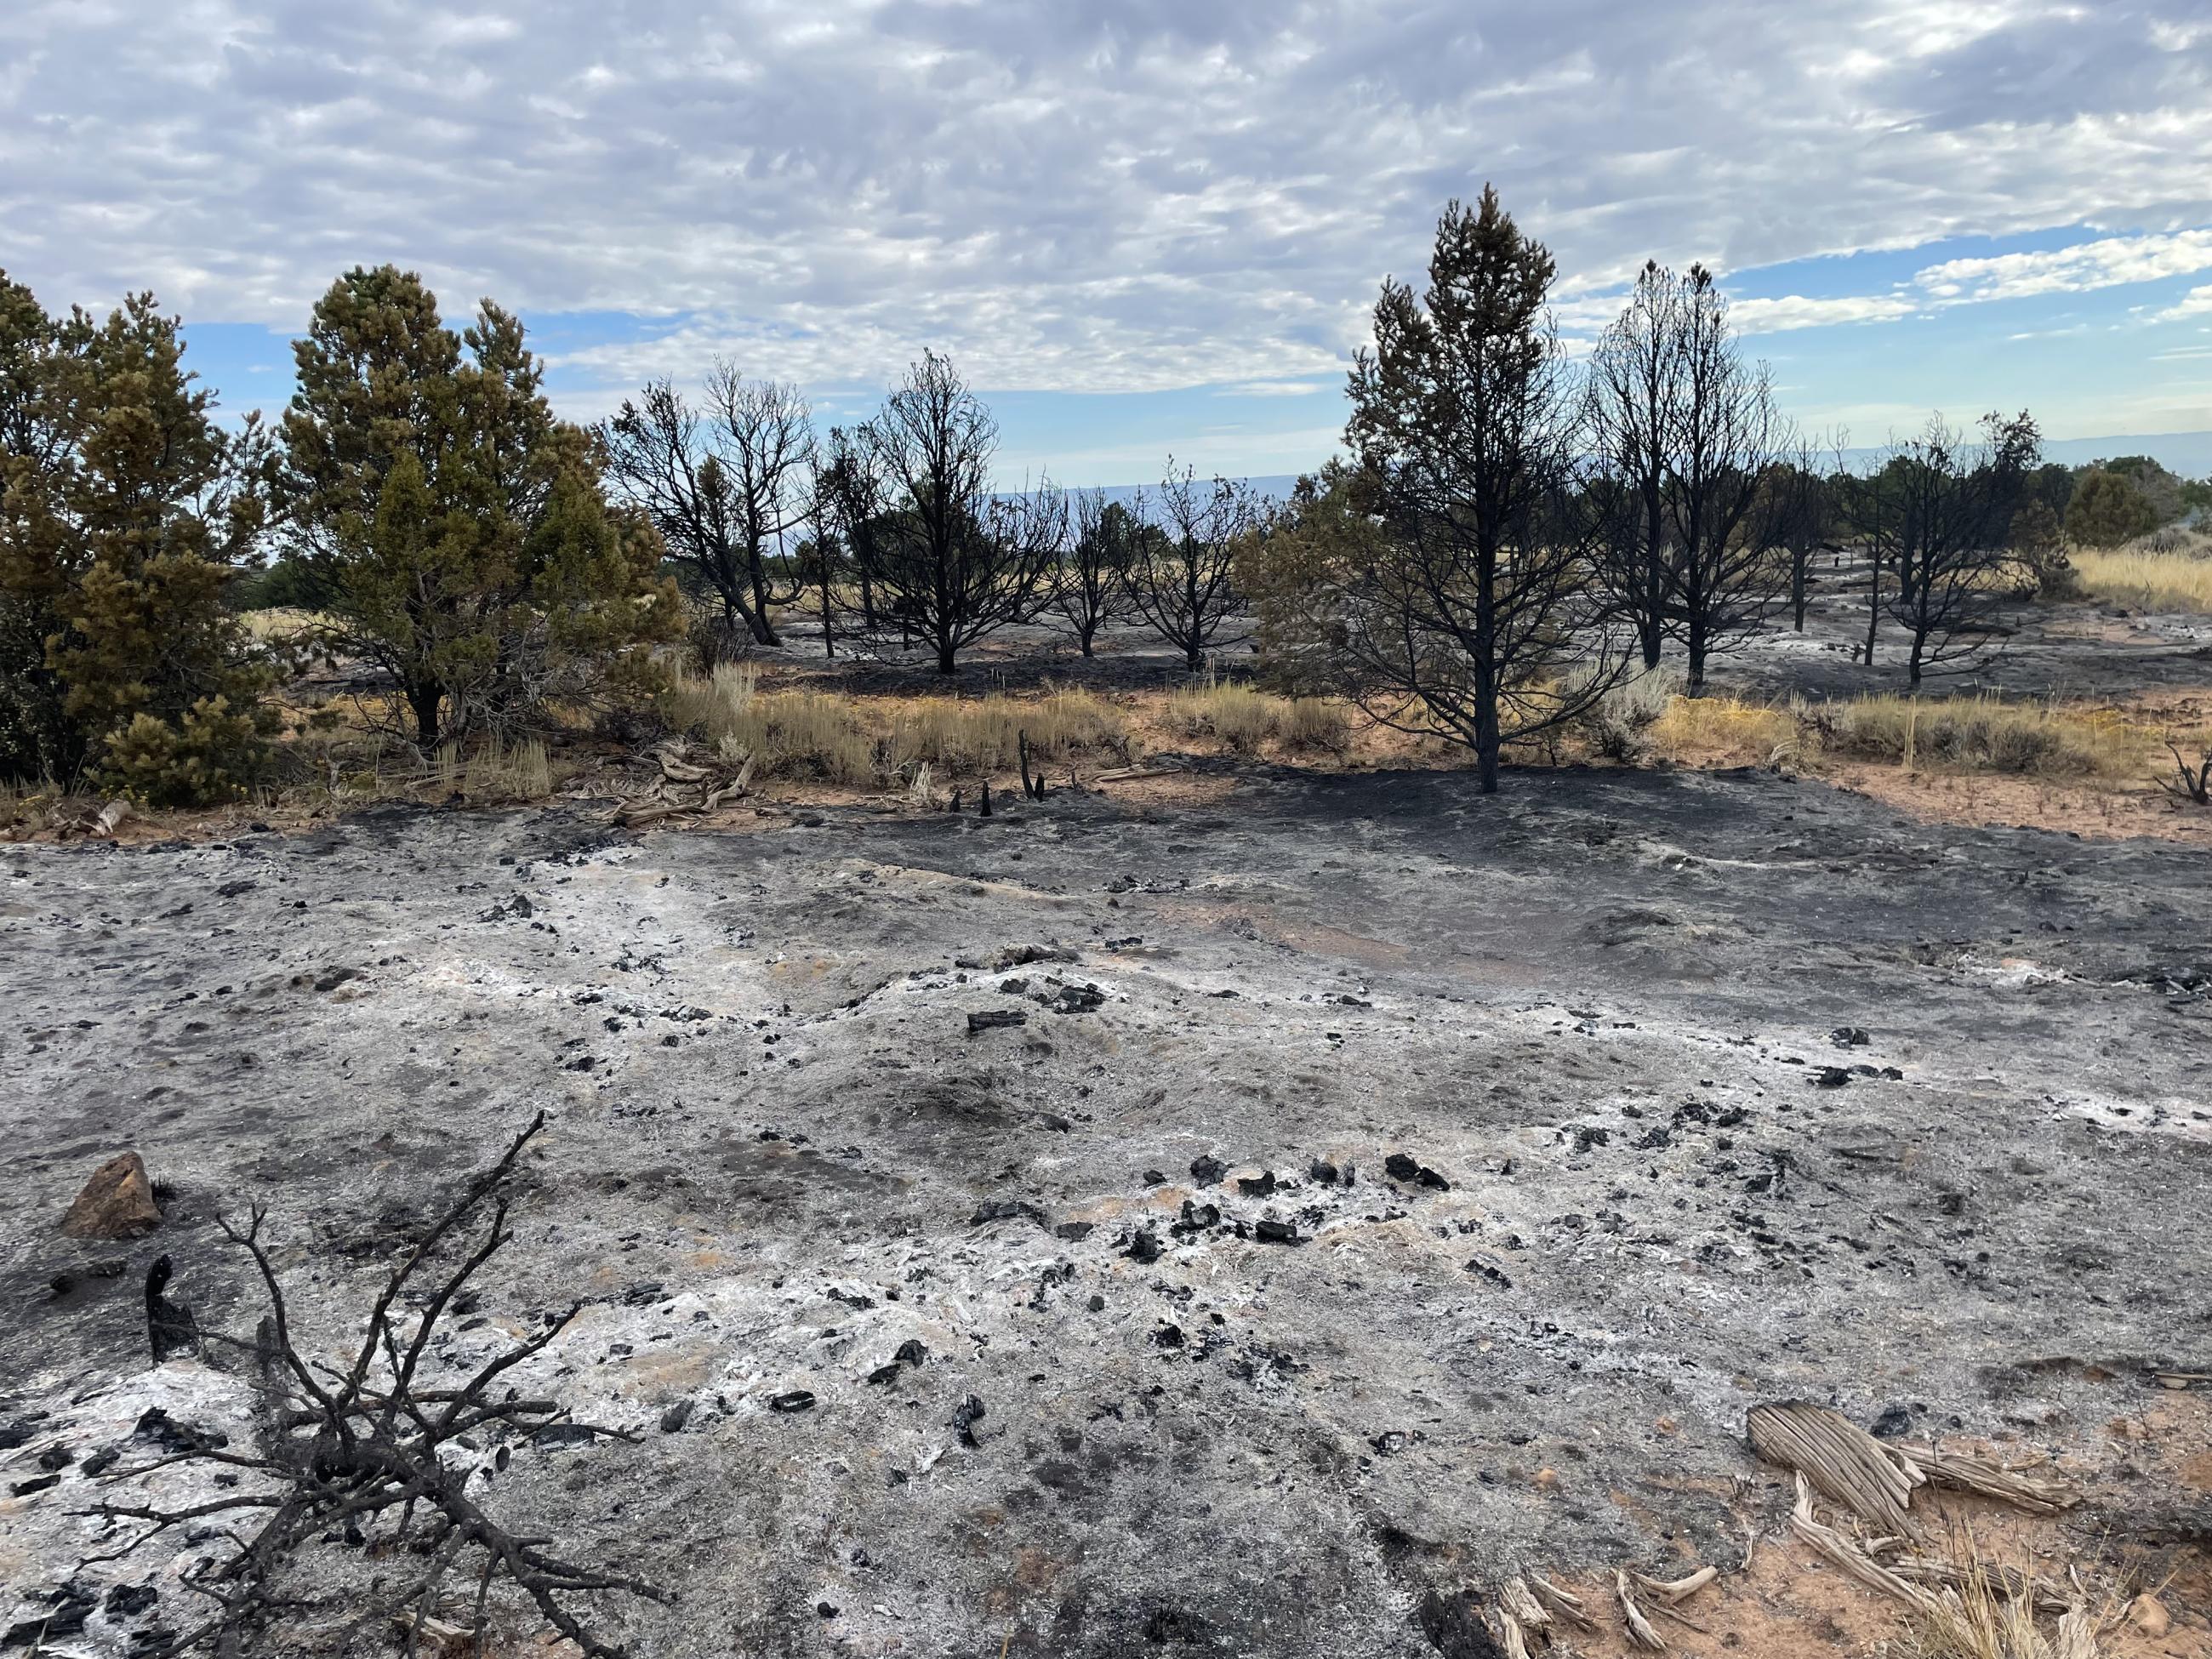 Image of area after the Little Mesa fire burned up the dead and down woody material leaving behind islands of green vegetation.  Low to moderate intensity fires like the Little Mesa fire help to break down dead and down material that will put nutrients back into the soil for future regeneration of native plants.  